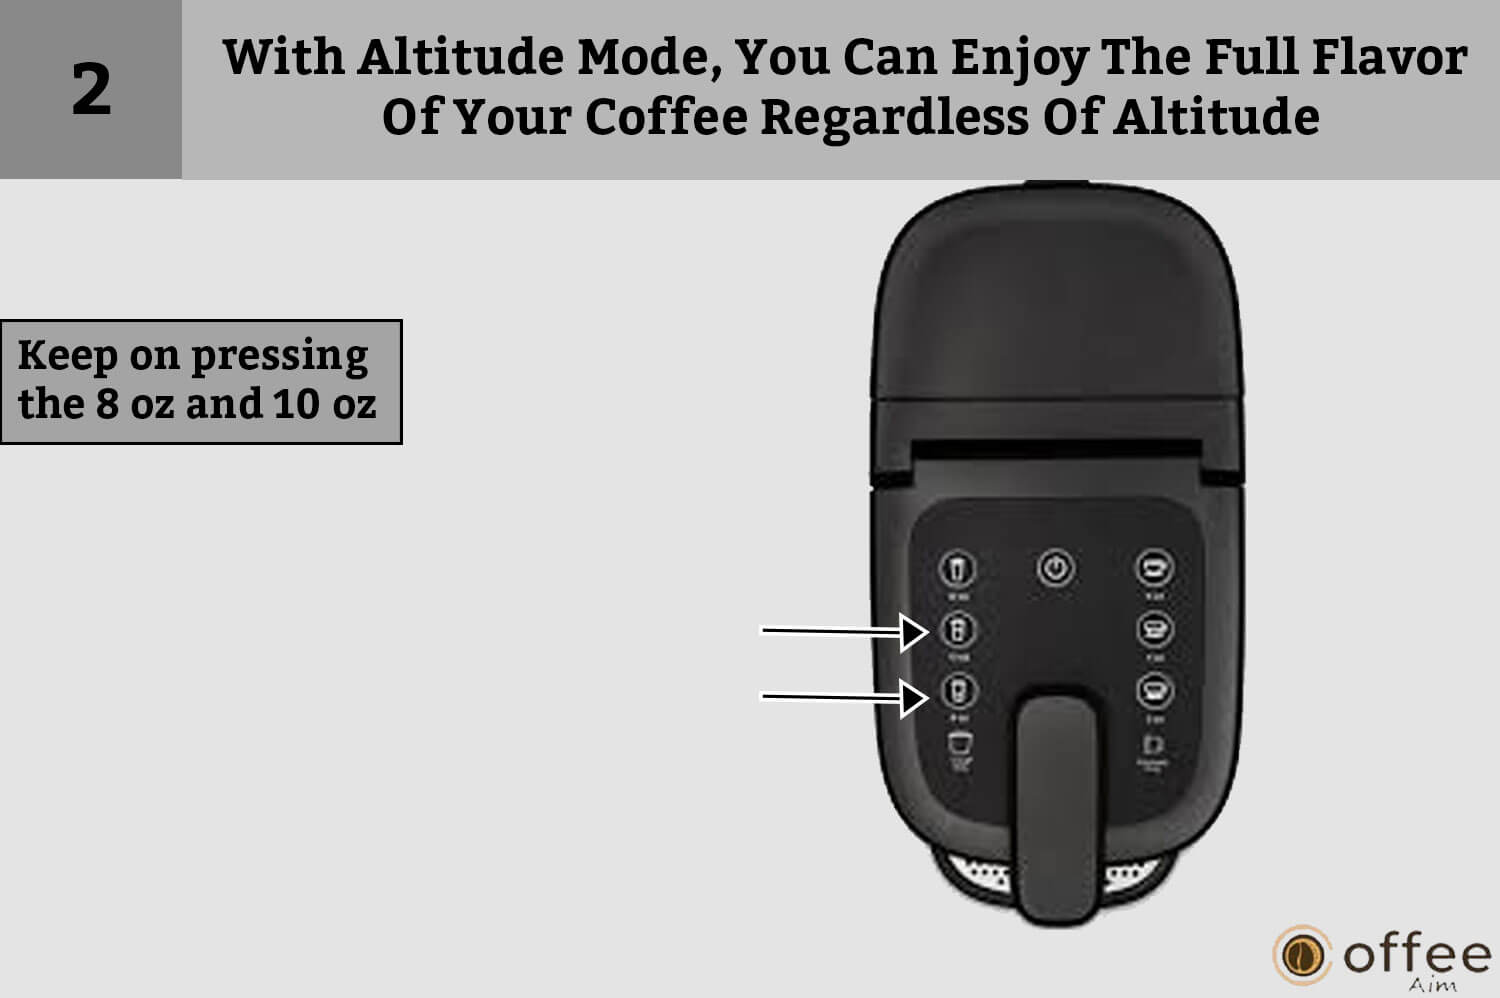 This image demonstrates the process of "Continuously pressing the 8 oz and 10 oz buttons" as part of the Altitude Mode, ensuring you savor the full coffee flavor, regardless of altitude. This pertains to the article on "How to Connect Nespresso Vertuo Creatista Machine."




